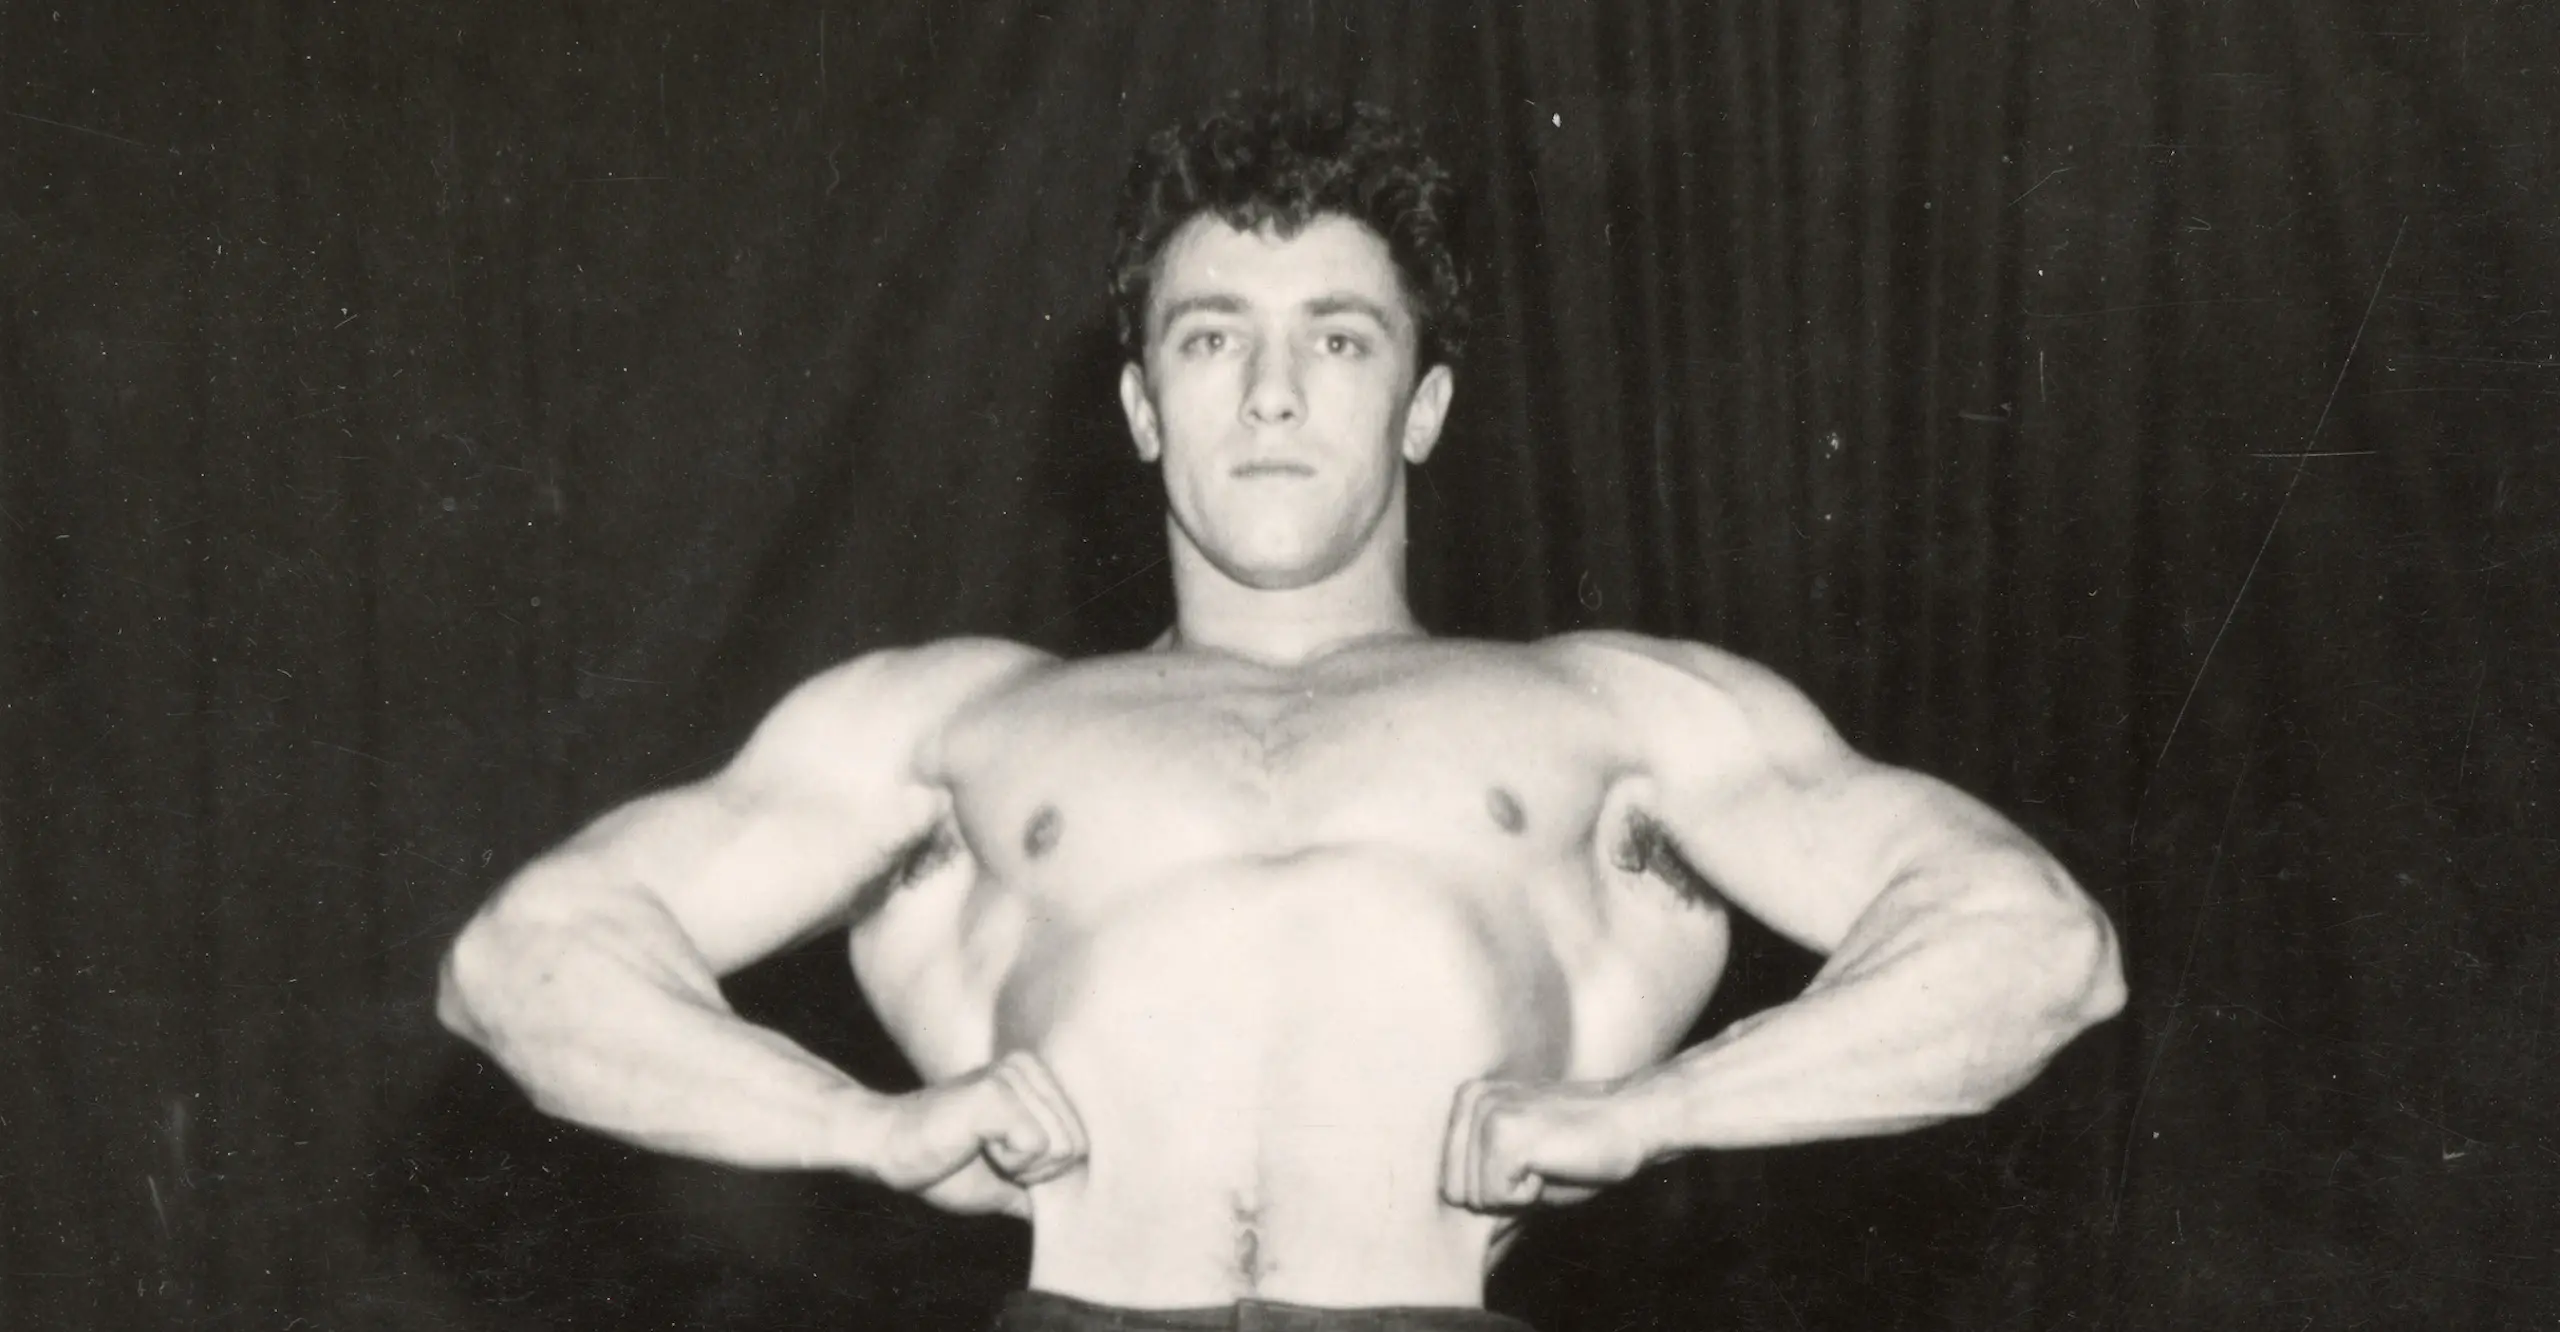 Black and white photo of head and shirtless torso of a man in full muscle pose.